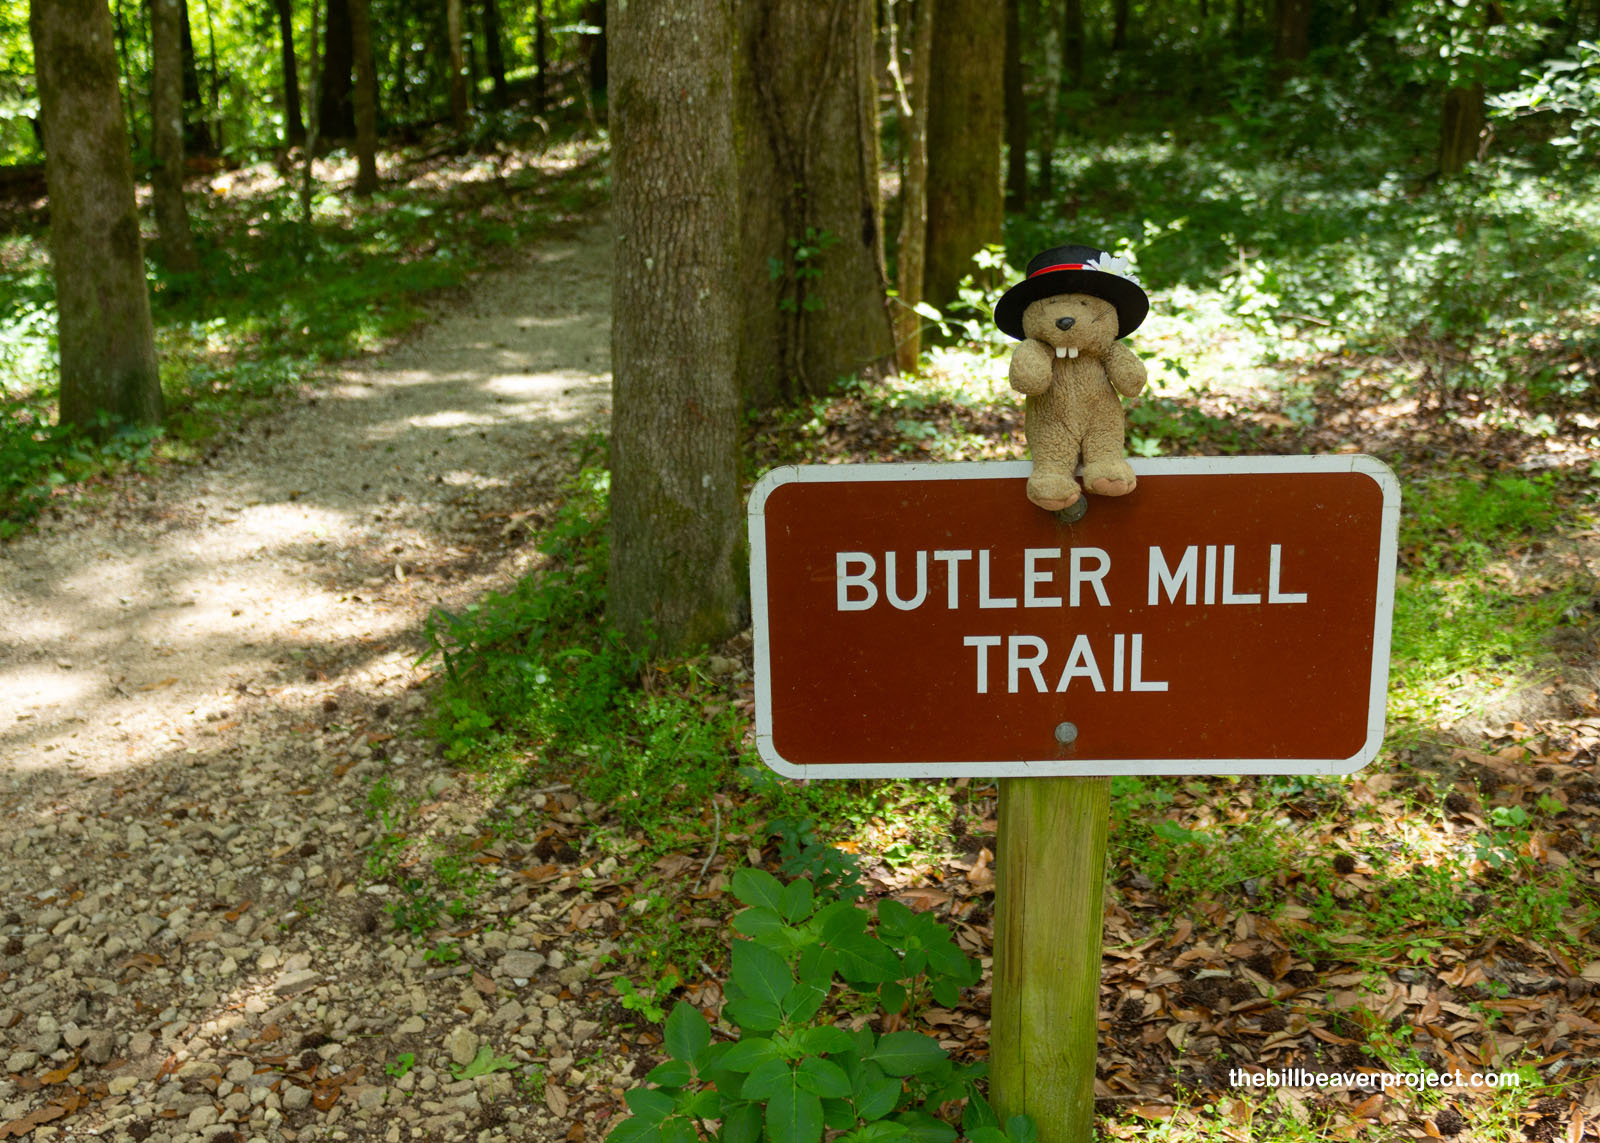 The Butler Mill Trail leads off into the forest!